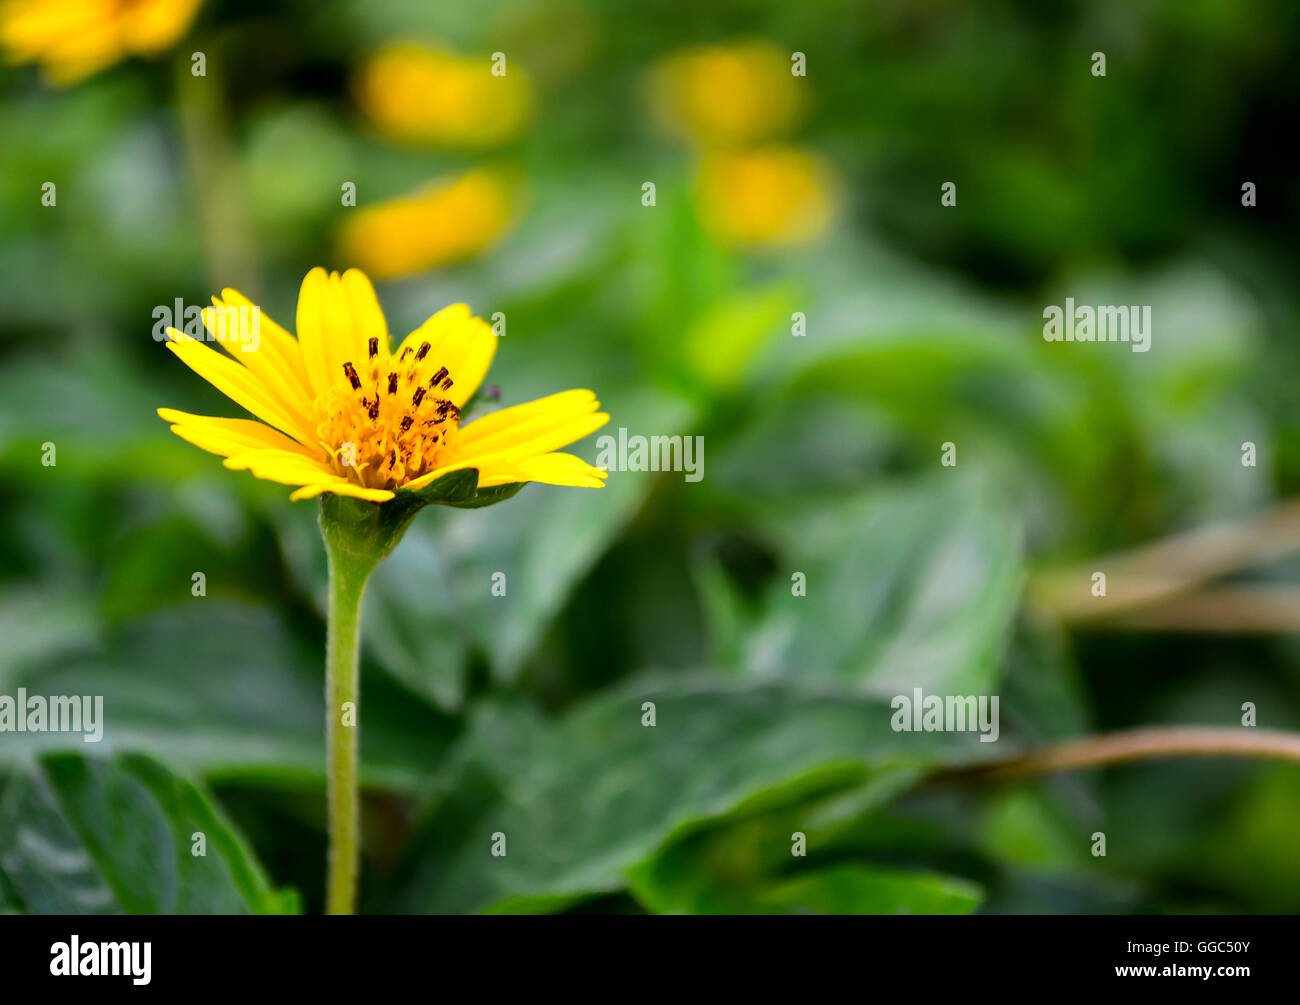 Focus yellow daisy flower on green leaf background Stock Photo